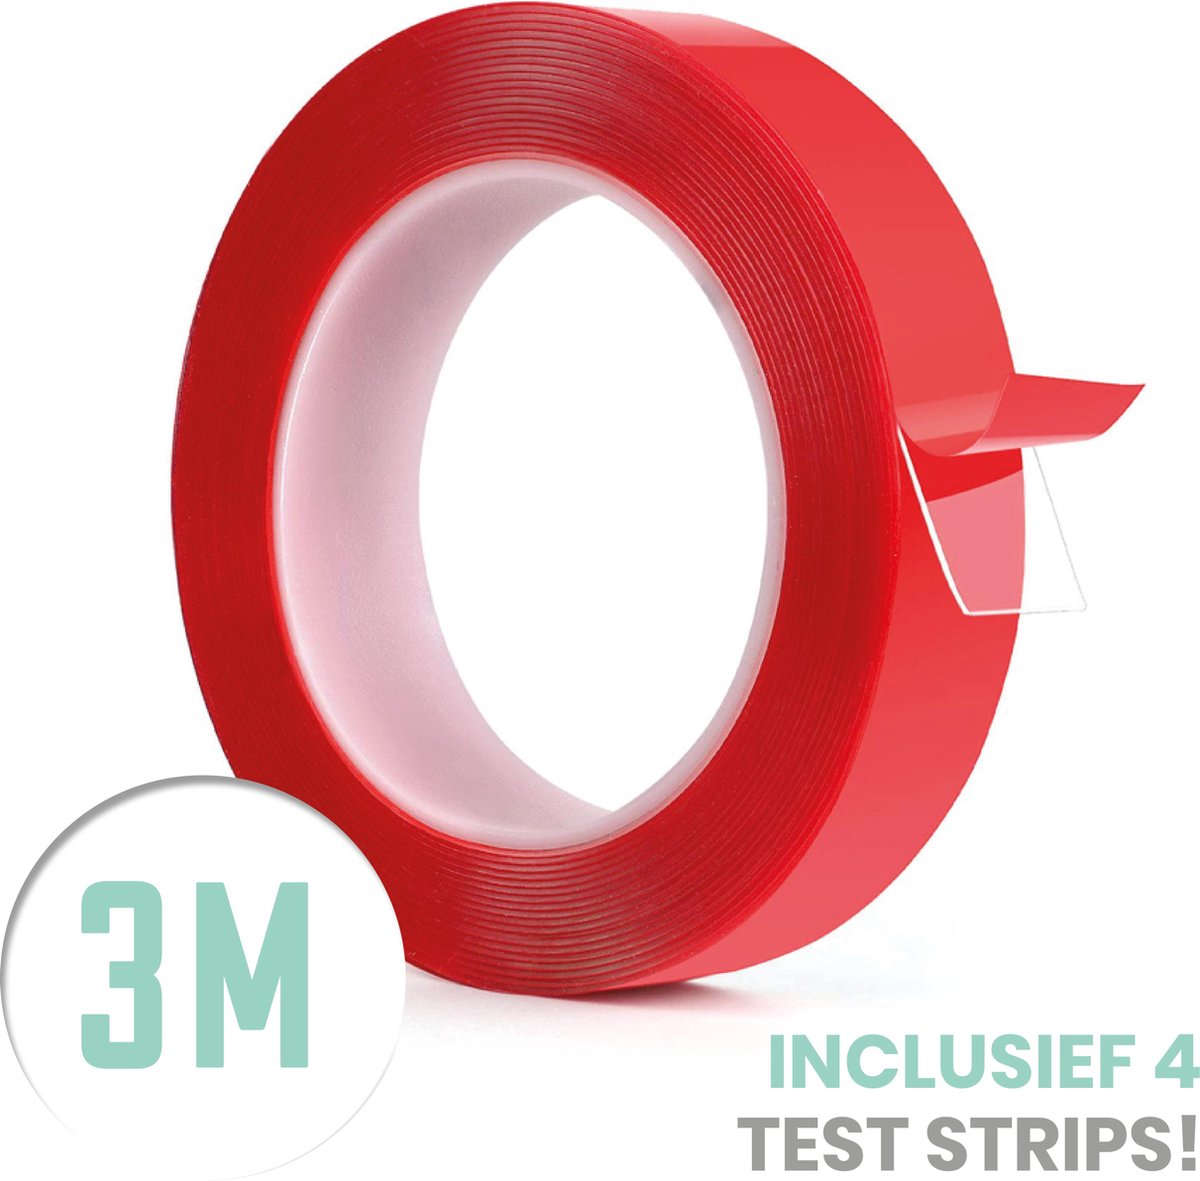 SOLITY® Dubbelzijdig Tape - Montagetape - Extra Sterk - Inclusief Extra’s - Transparant - 3m x 25mm - SOLITY